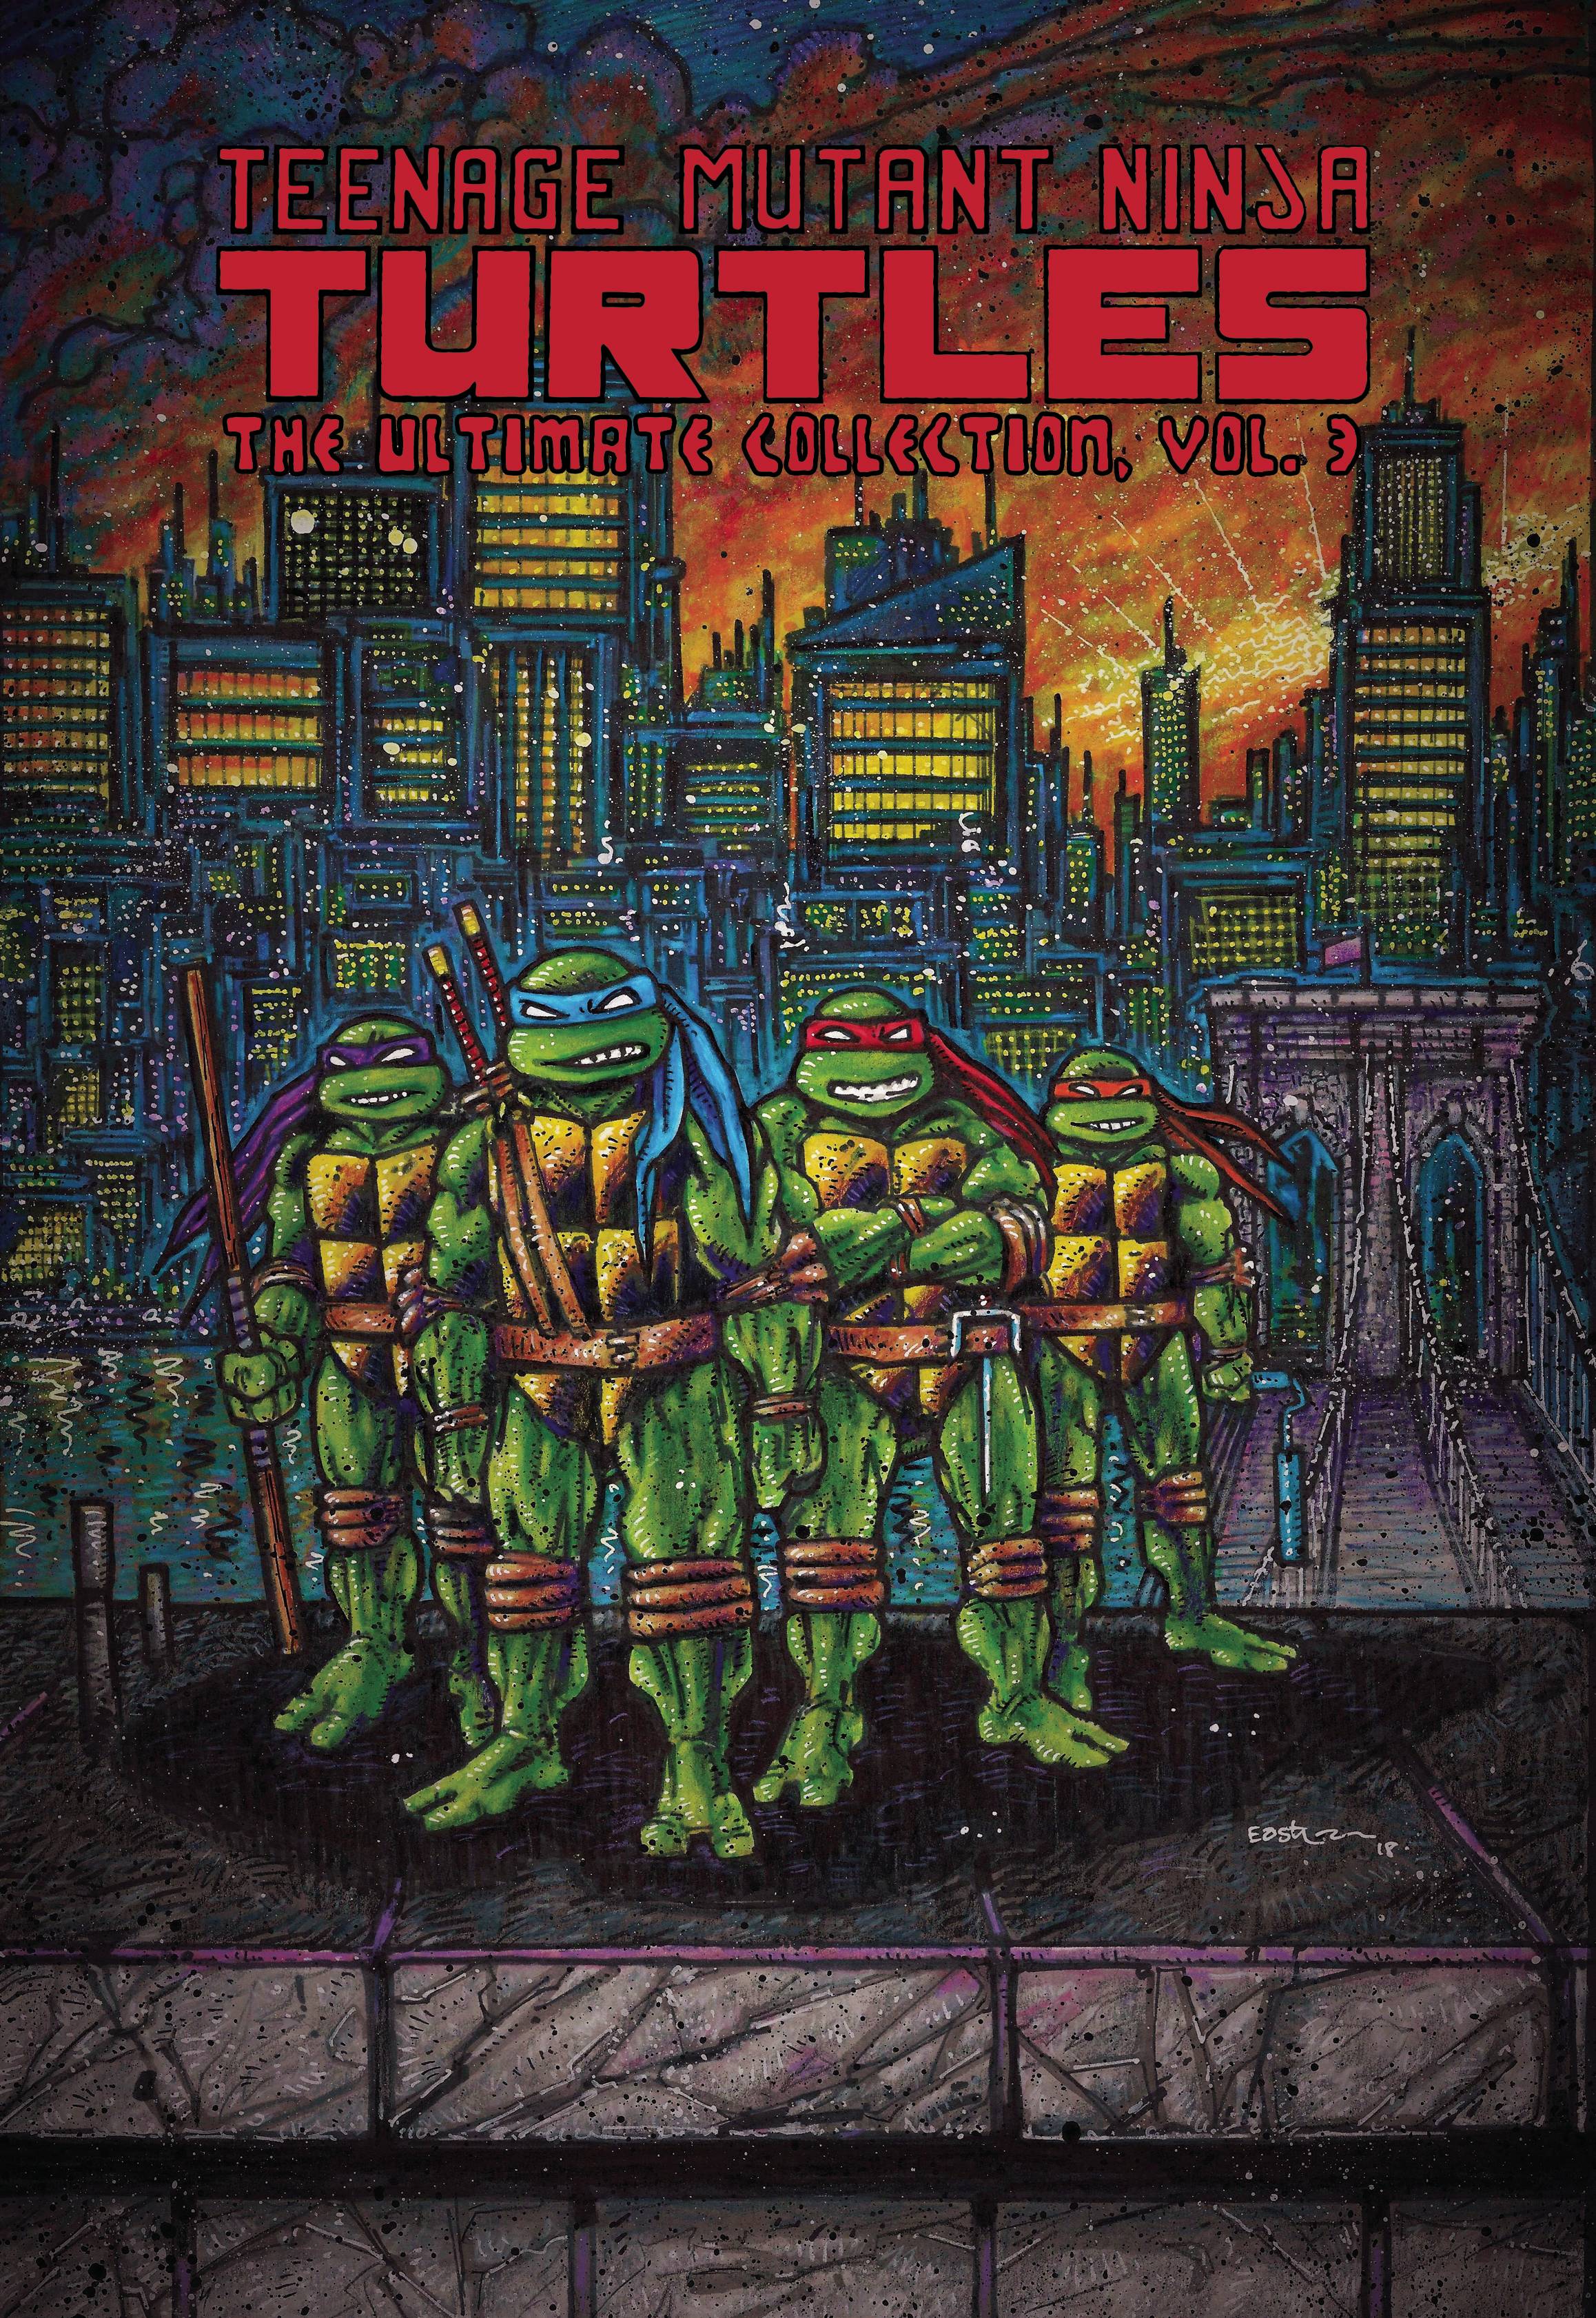 Teenage Mutant Ninja Turtle Graphic Novel Collection by First